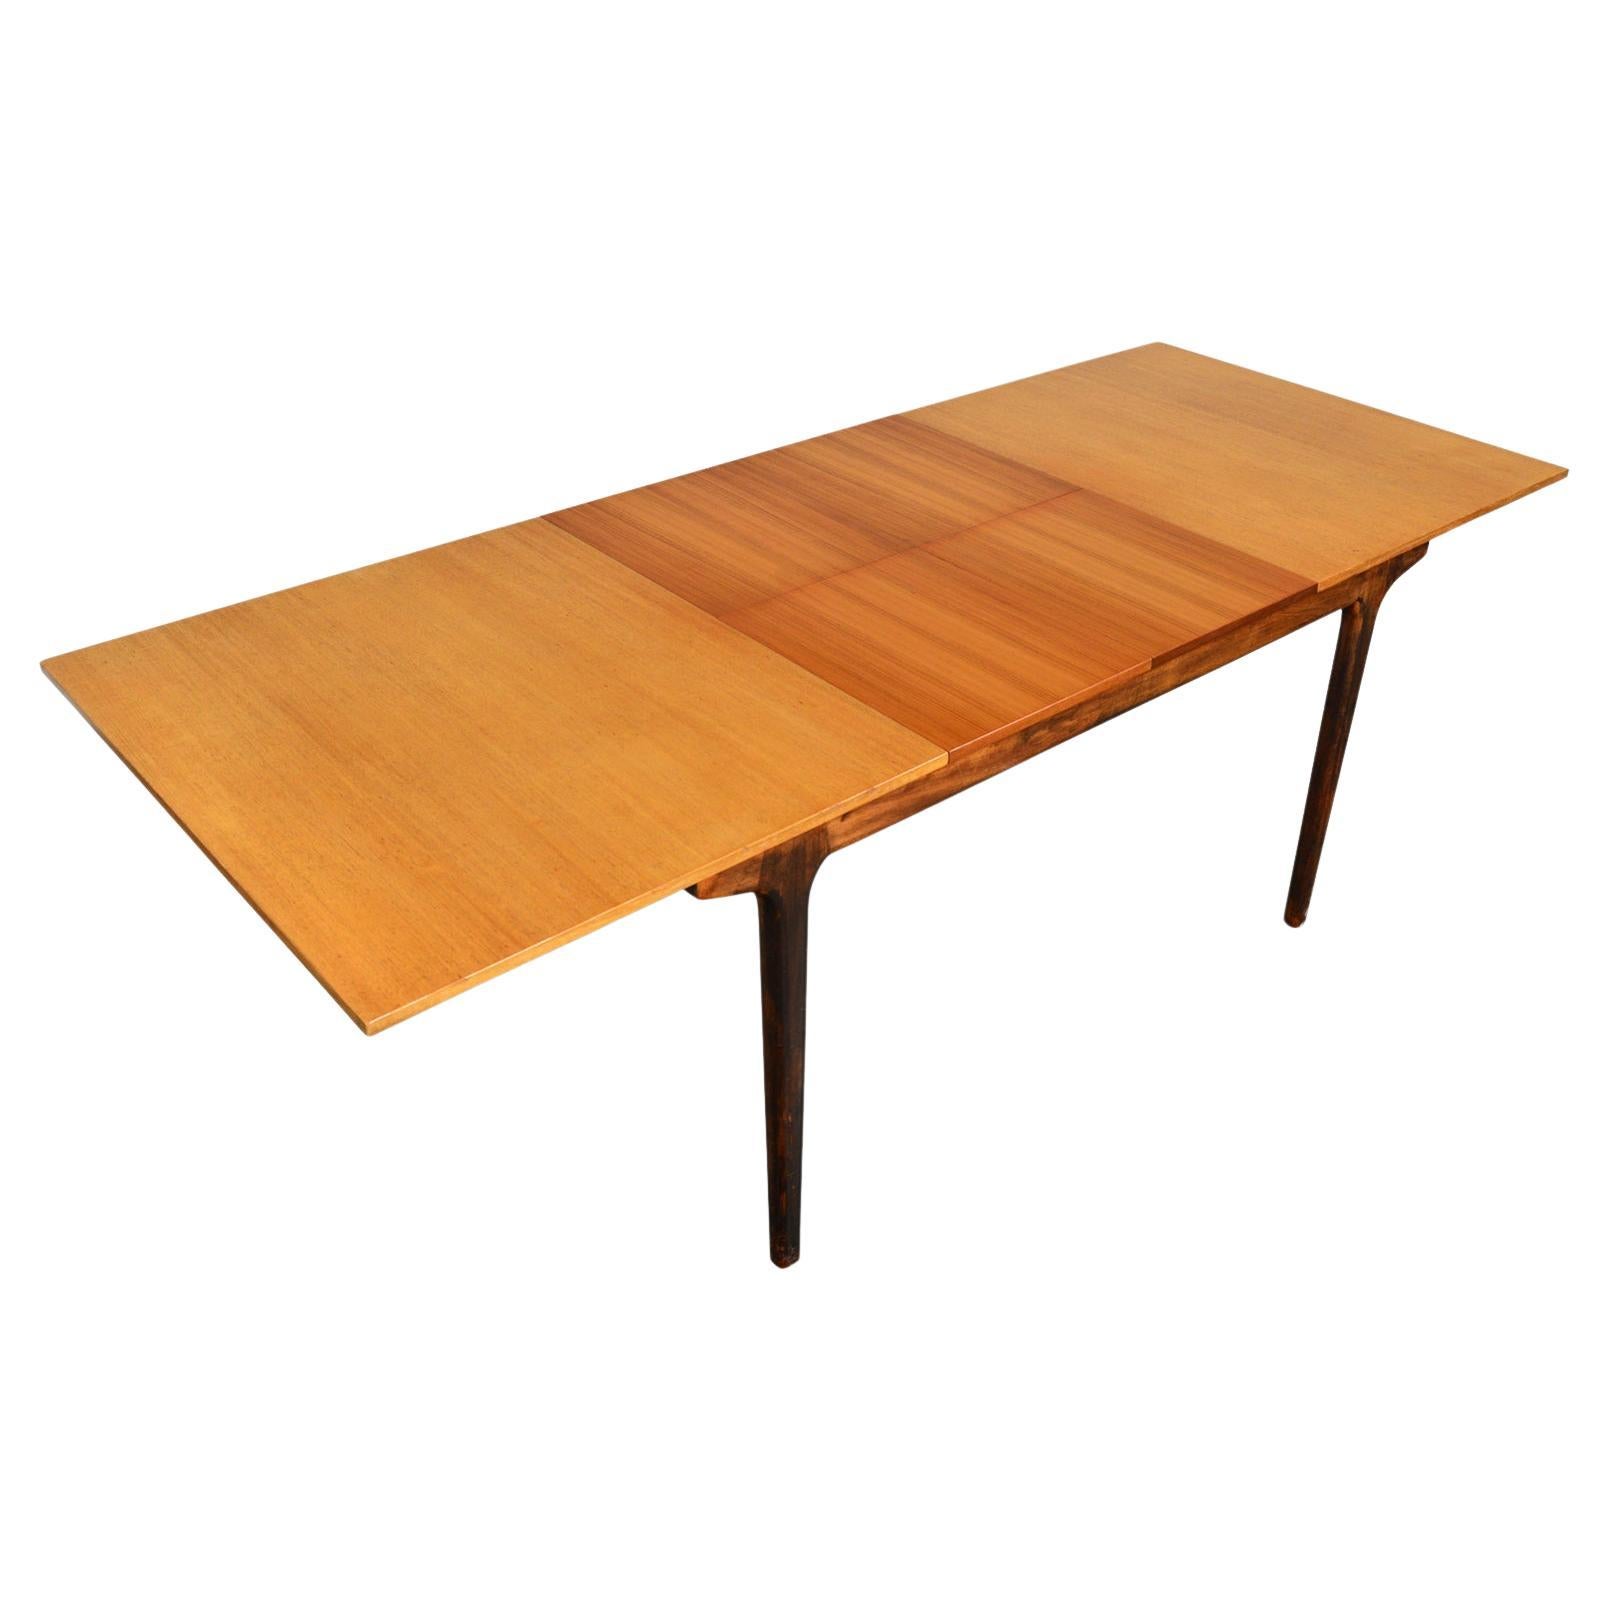 A.H. Mcintosh Double Butterfly Leaf Dining Table in Teak